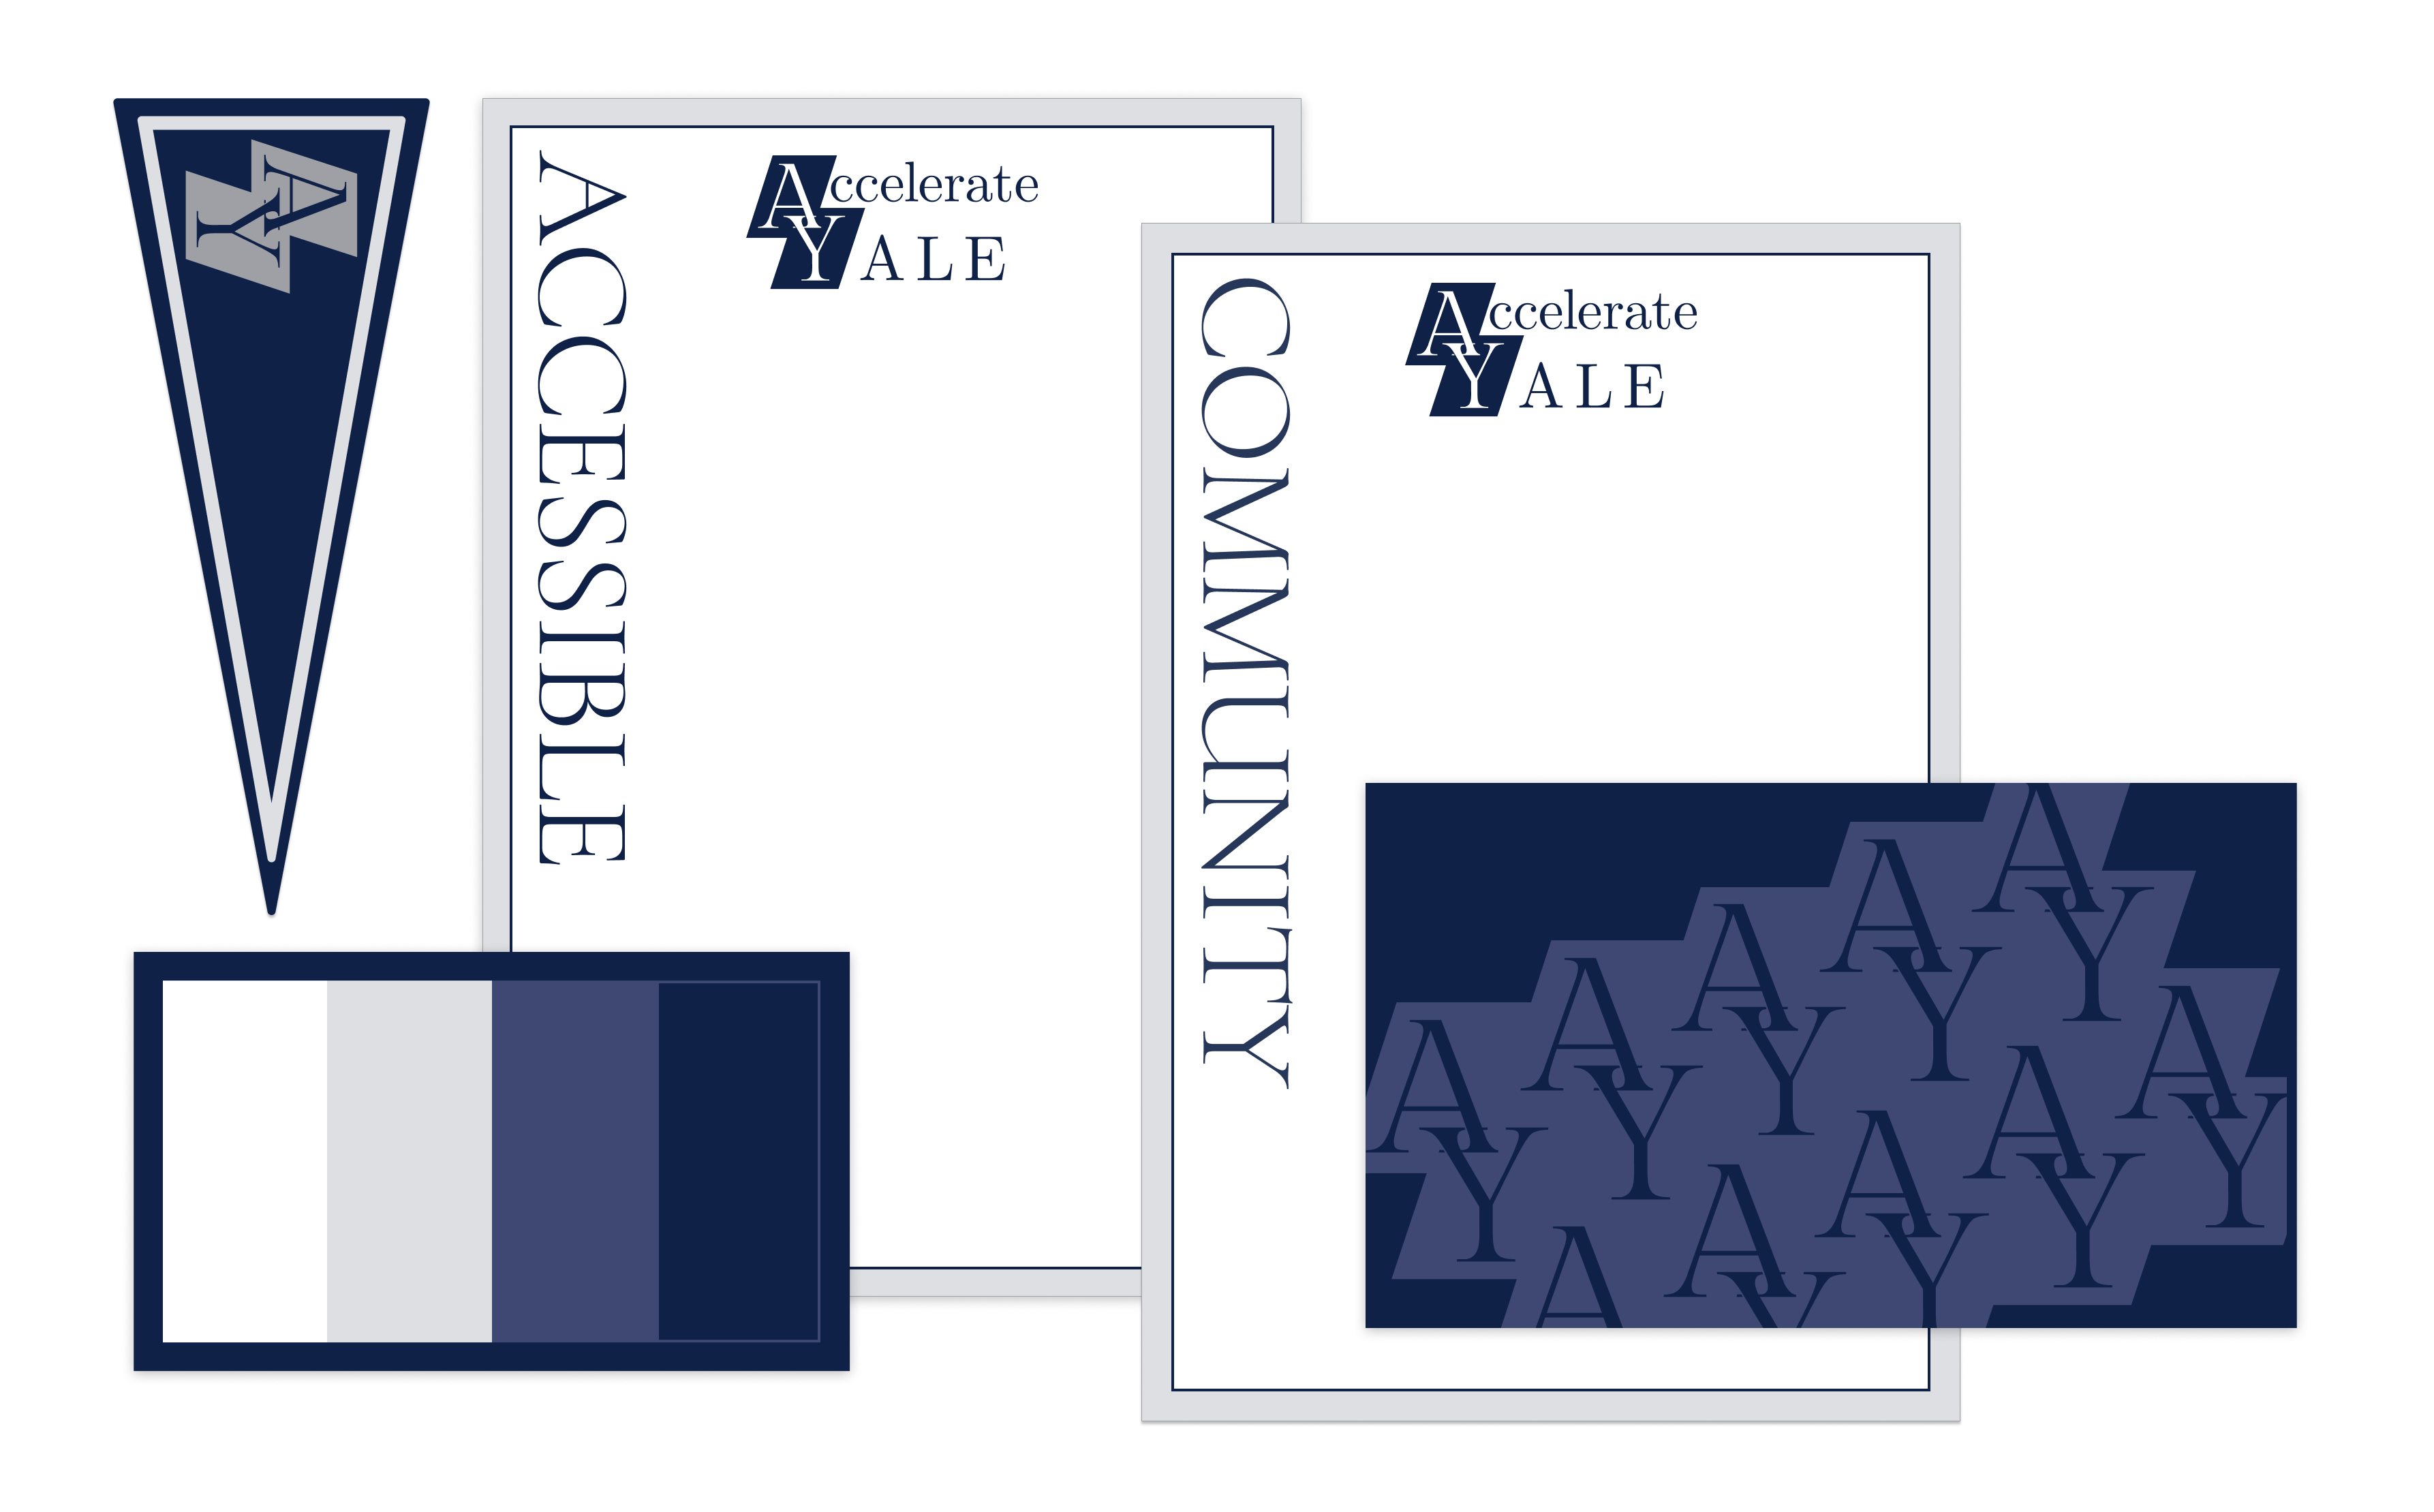 Branding Materials of Accelerate Yale